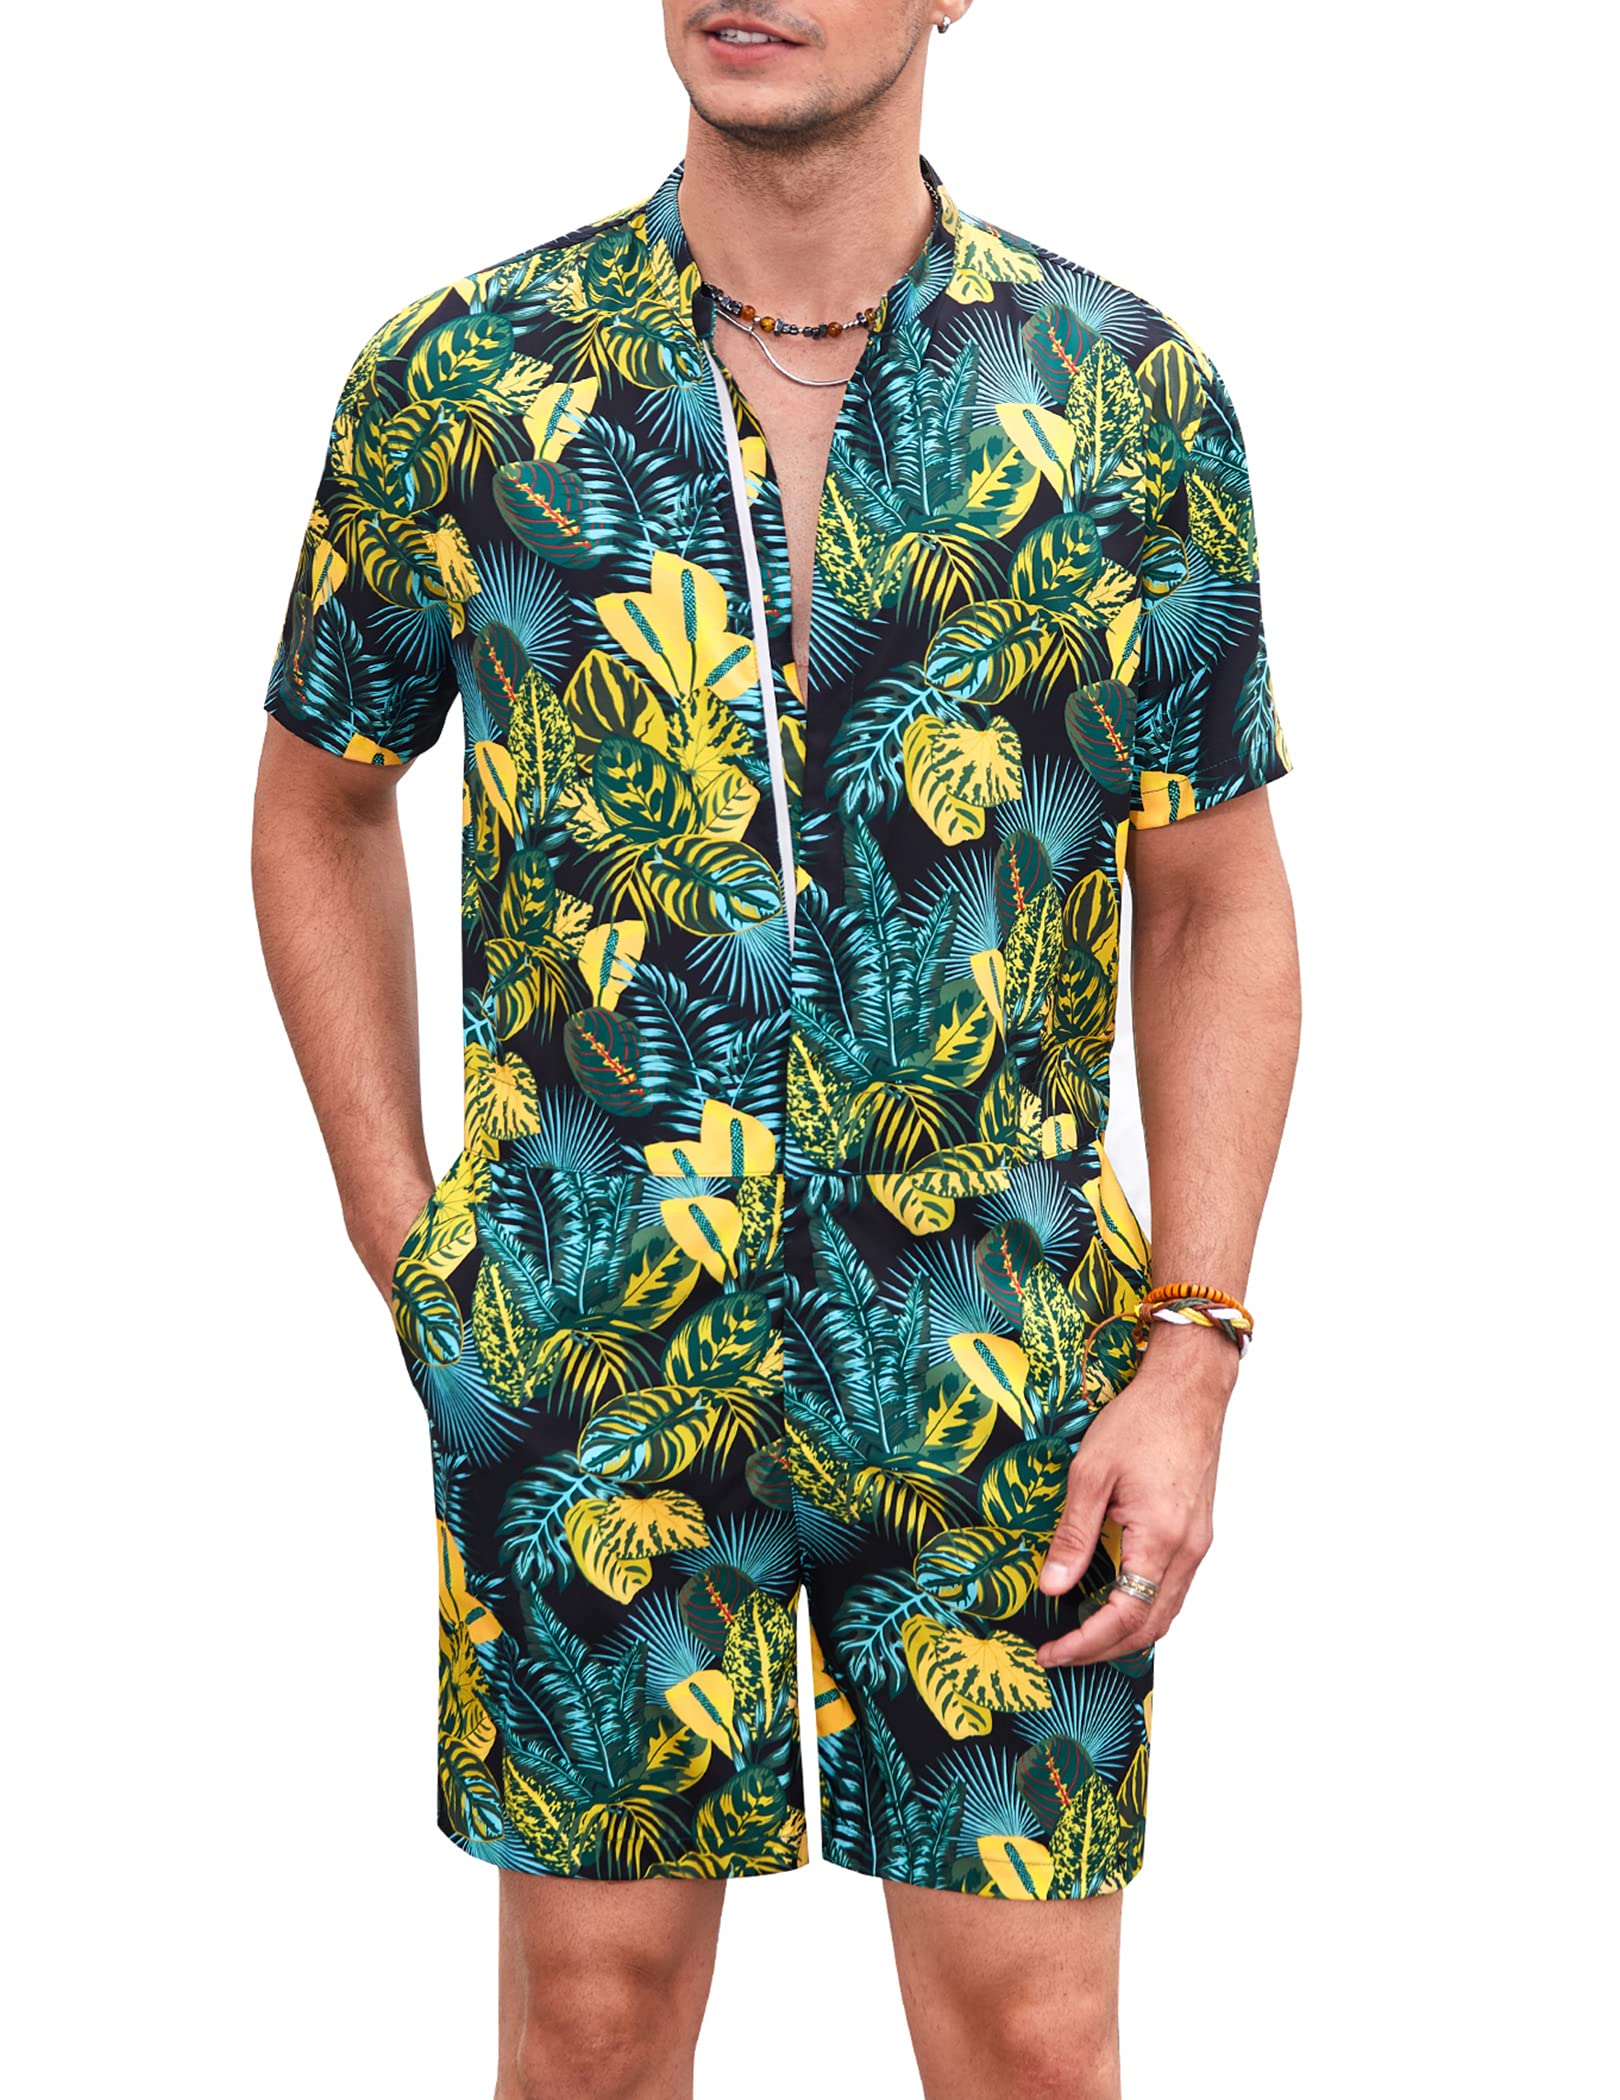 COOFANDY Men's One Piece Rompers Short Sleeve Hawaiian Floral Shirt Zipper  Jumpsuit Shorts Casual Beach Playsuit with Pockets Black-leaves X-Large